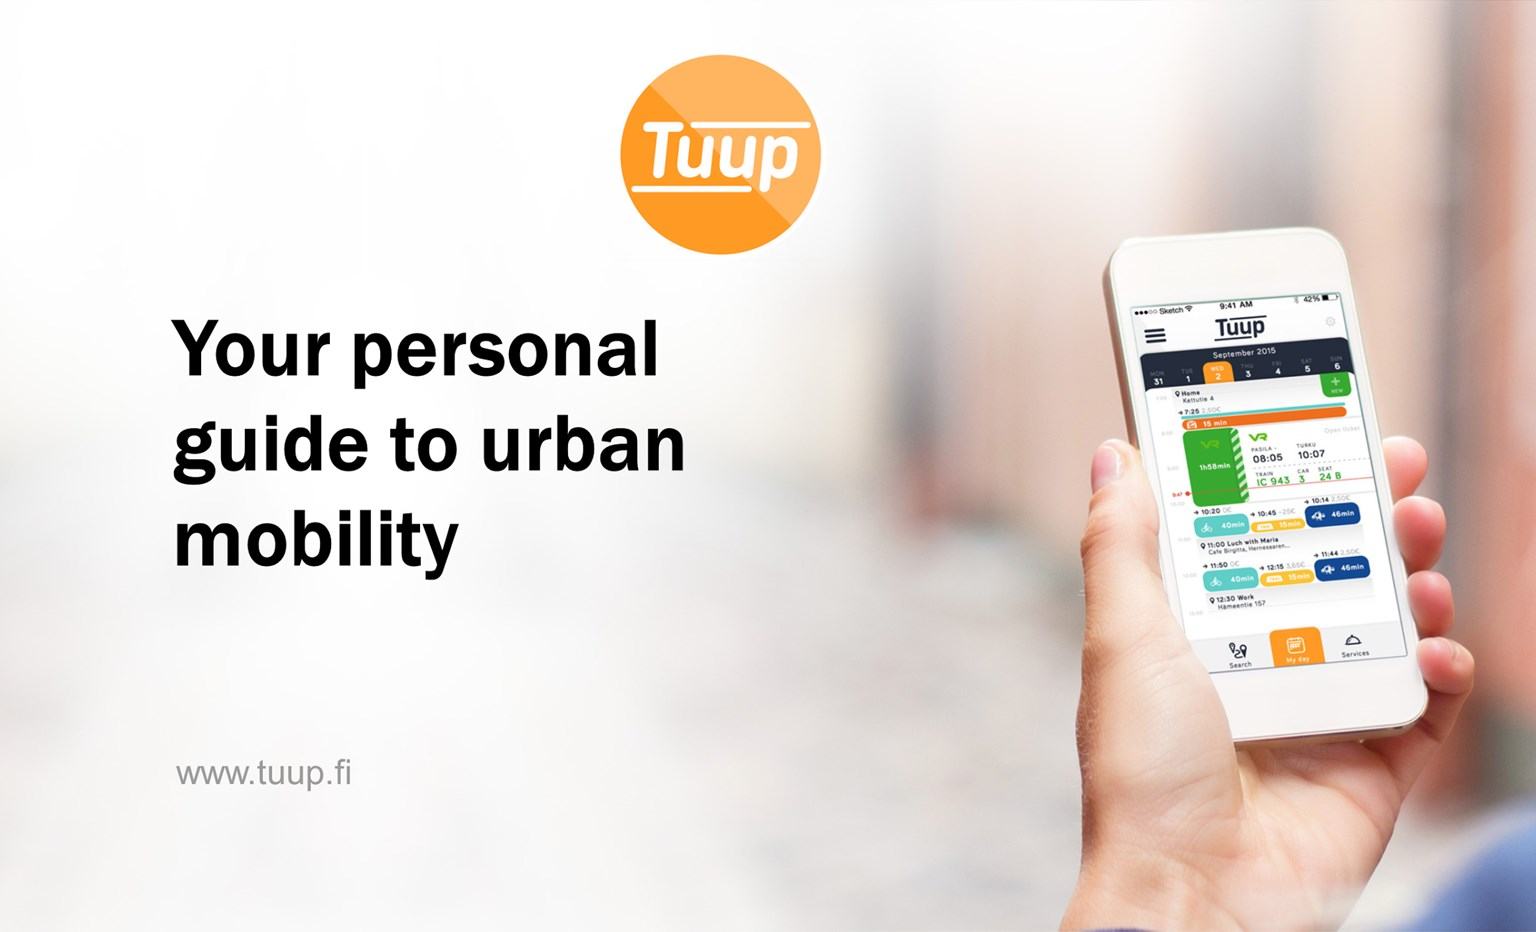 Mobility & Tourism Award: Tuup All mobility services at